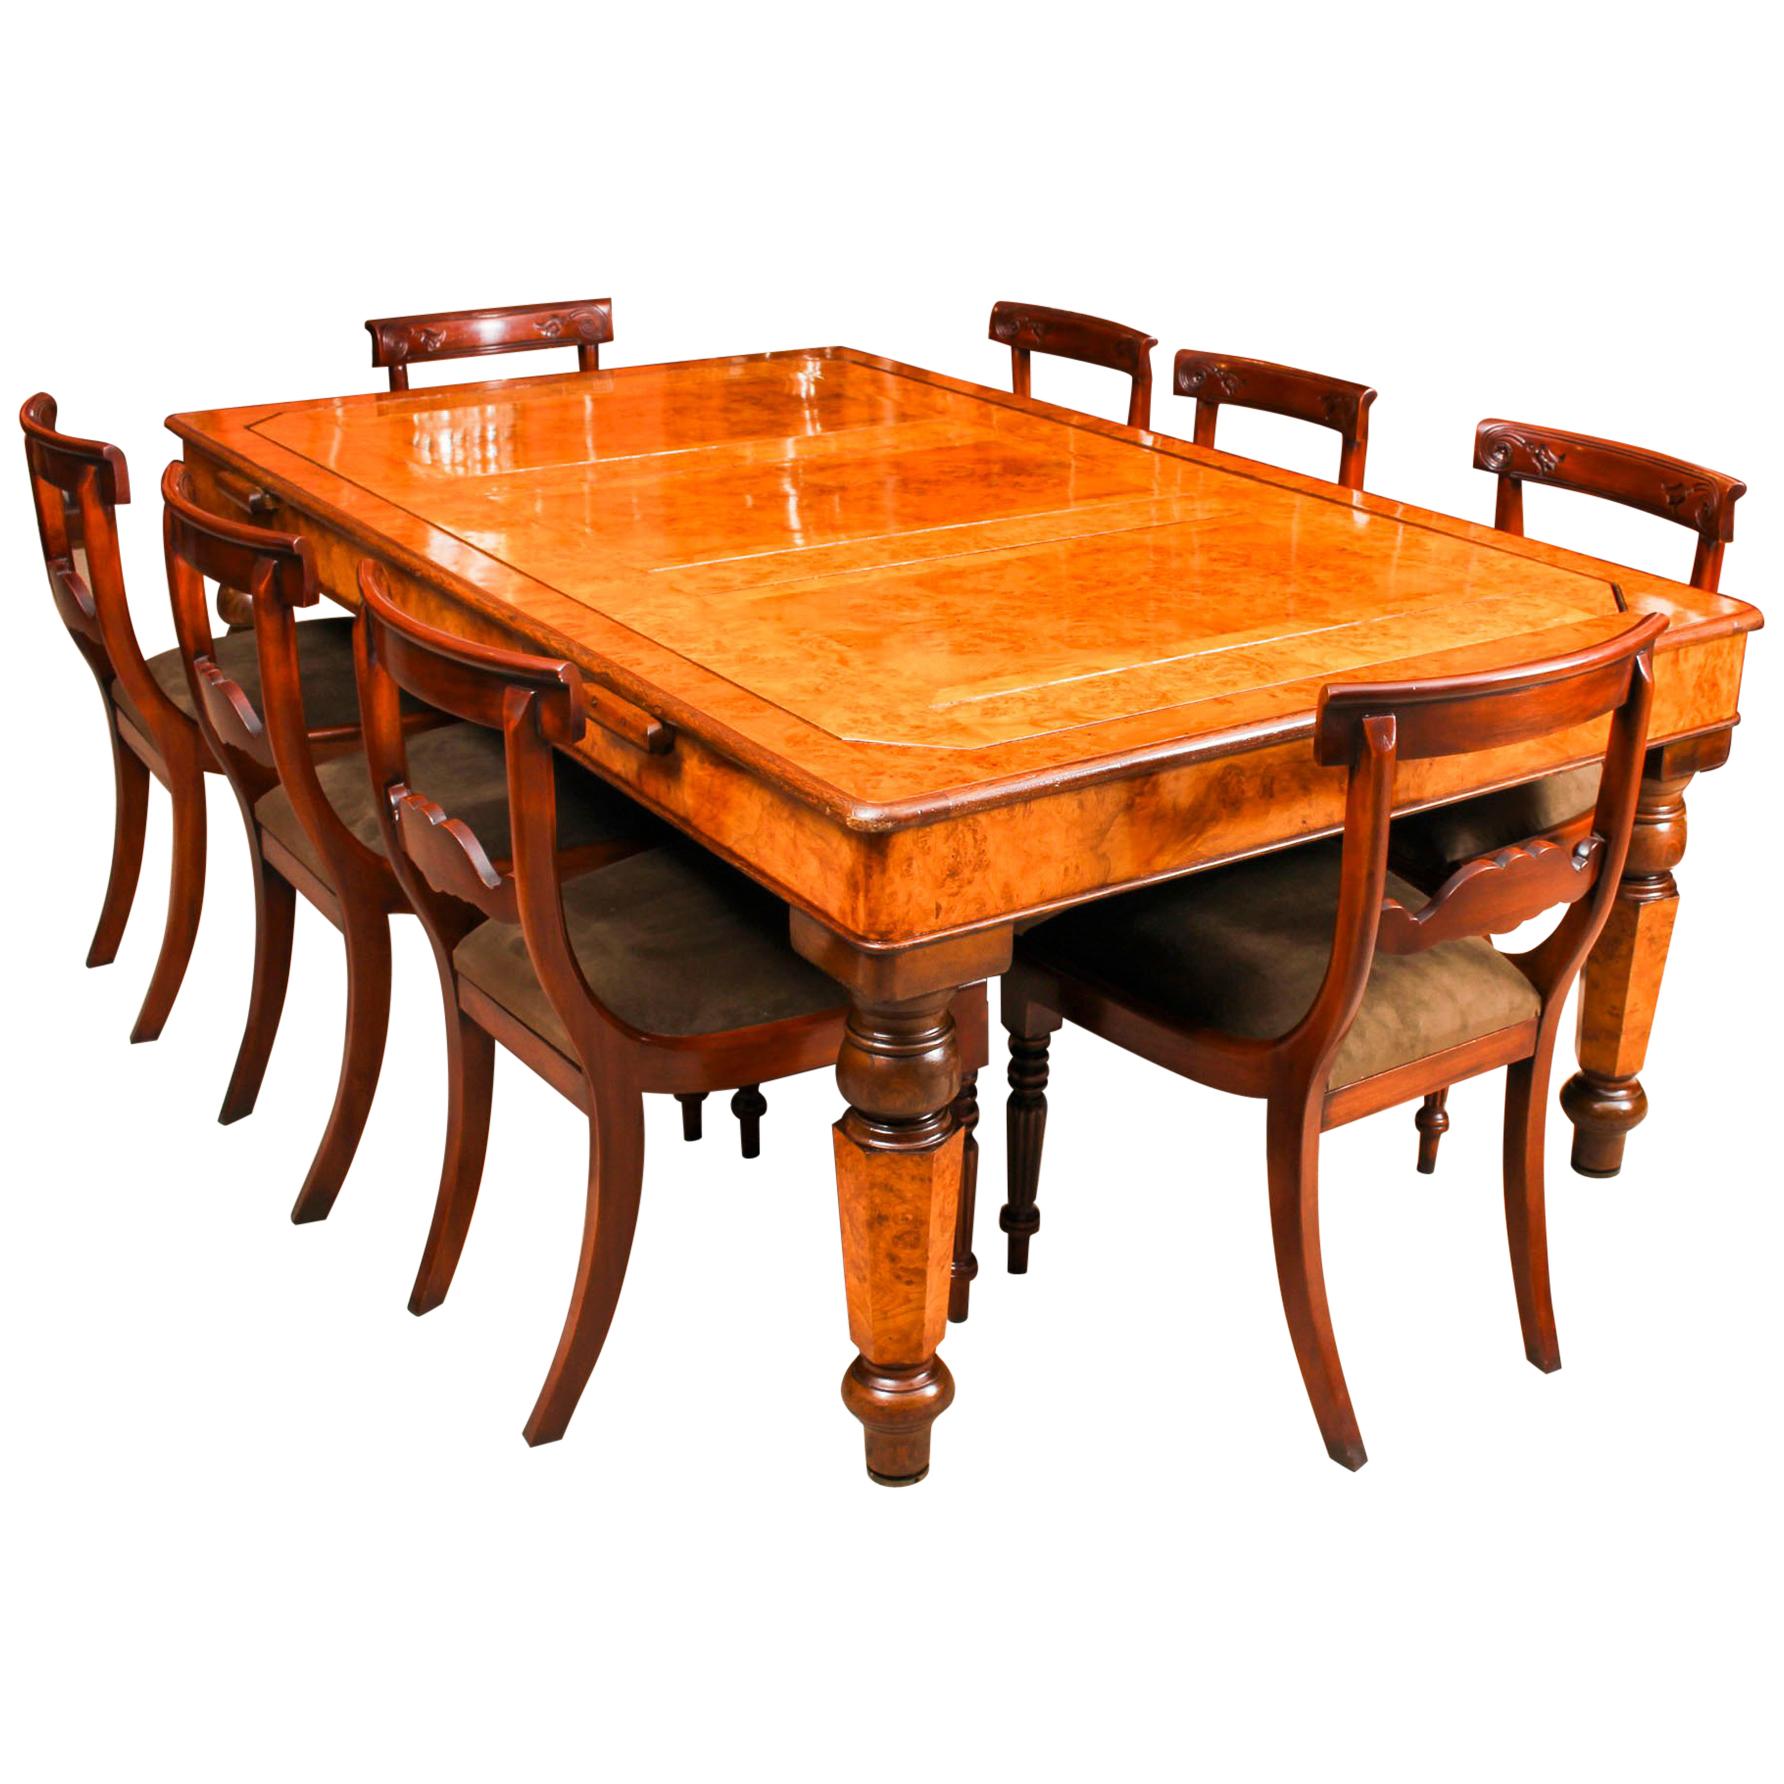 Antique Victorian Pollard Oak Snooker / Dining Table and 8 Chairs 19th Century